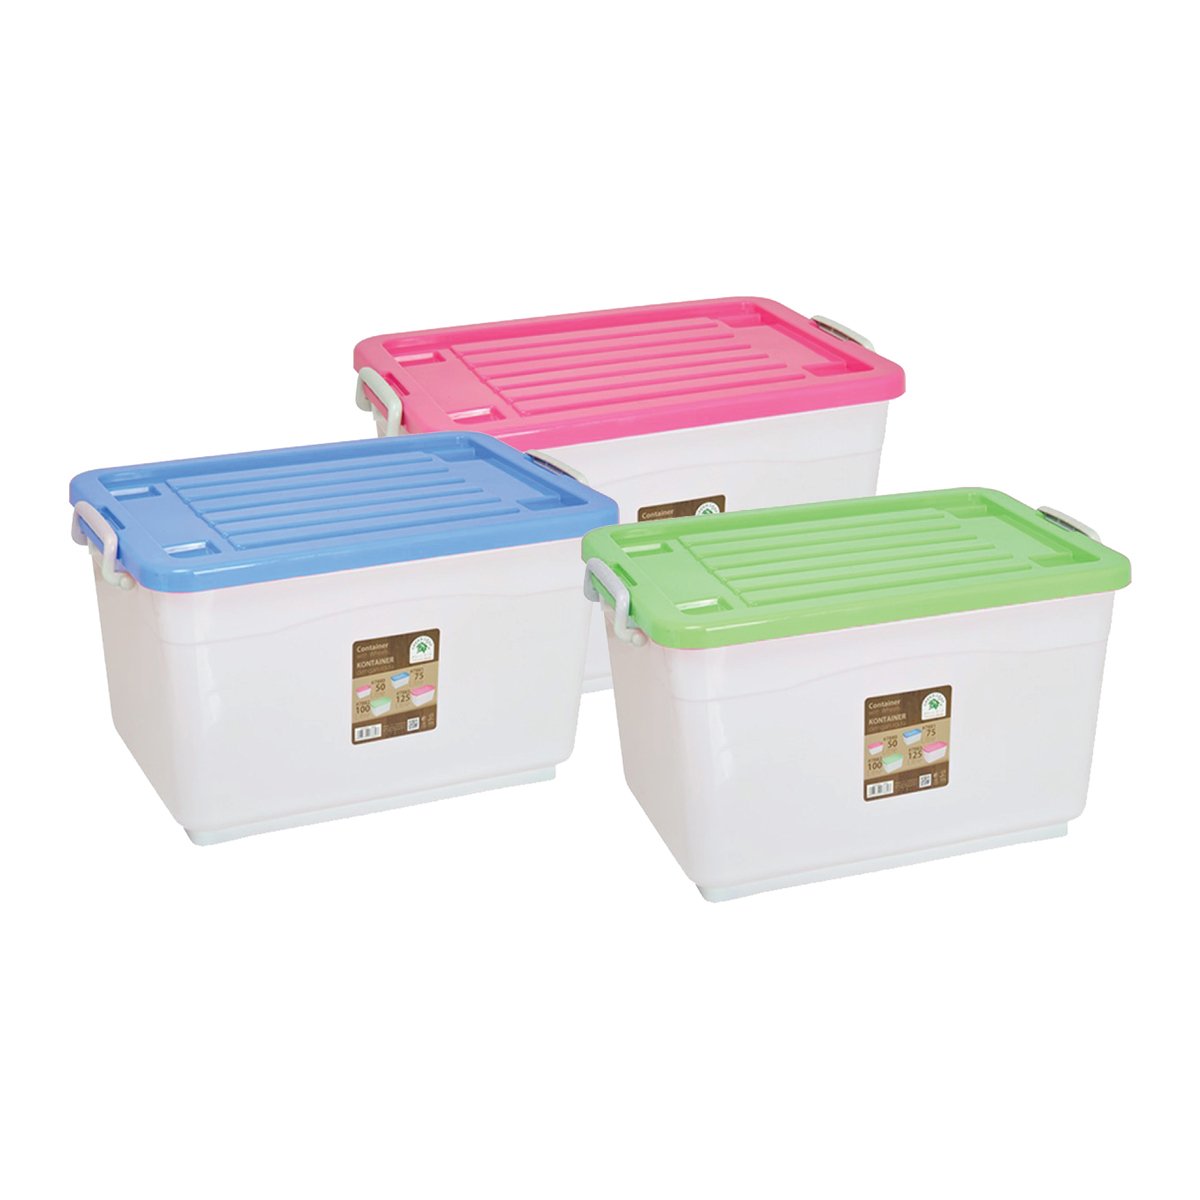 Green Leaf Plastic Container Sierra 50L 7880